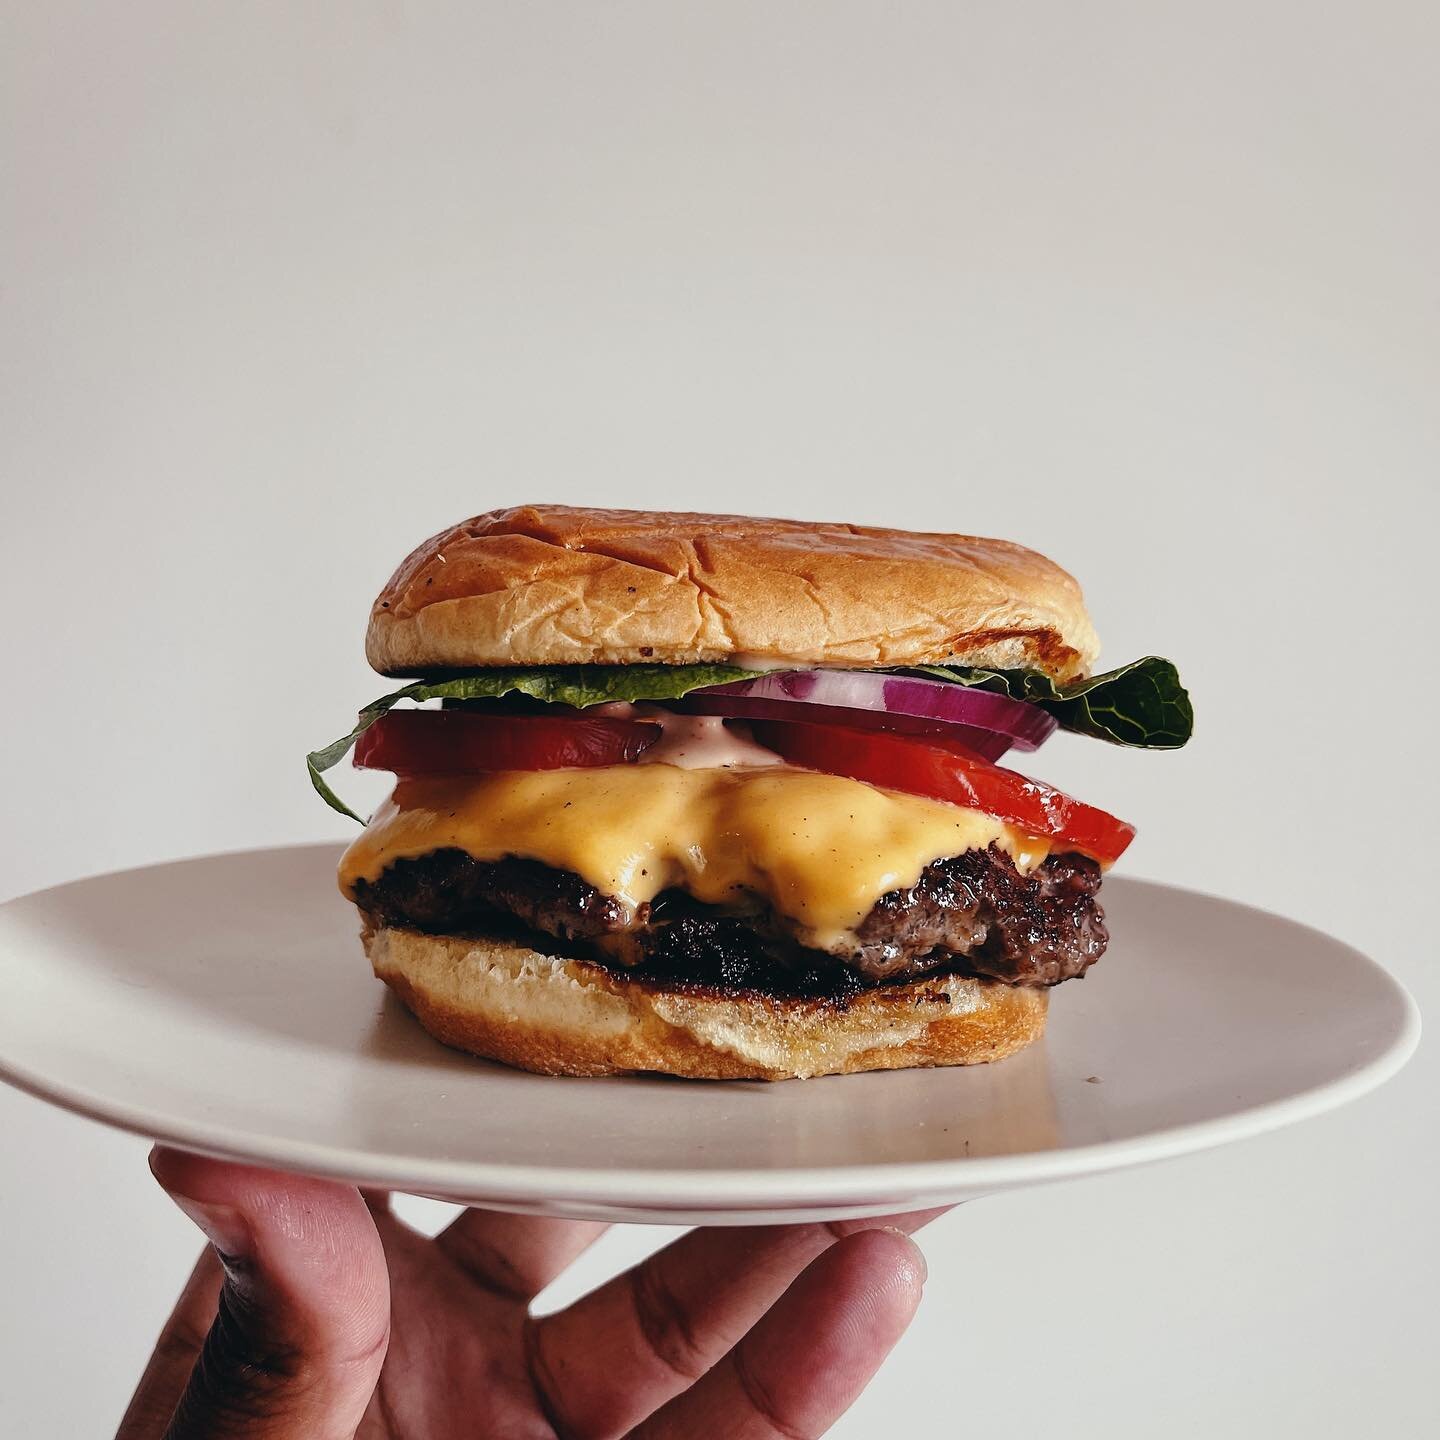 just a burger appreciation post lol...loving the tacos in mexico but missing a good ole burger and i realized i never shared the copy cat shake shack burger. even tho mdw has passed it&rsquo;s still primetime grilling season! full recipe is on the bl